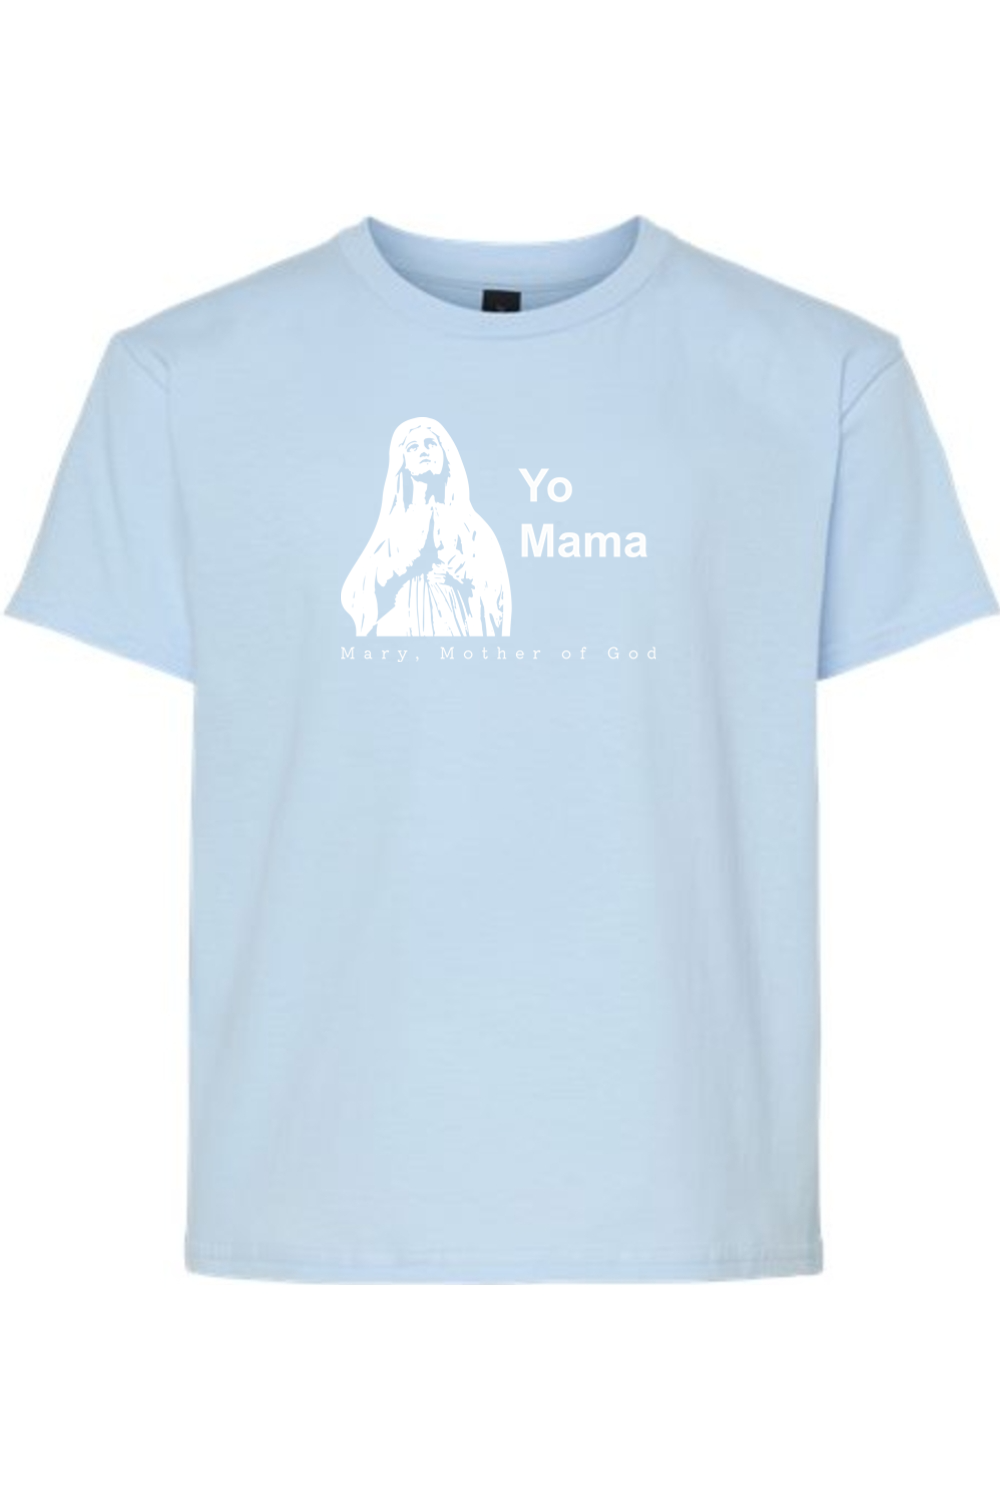 Yo Mama - Mary, Mother of God Youth T-Shirt